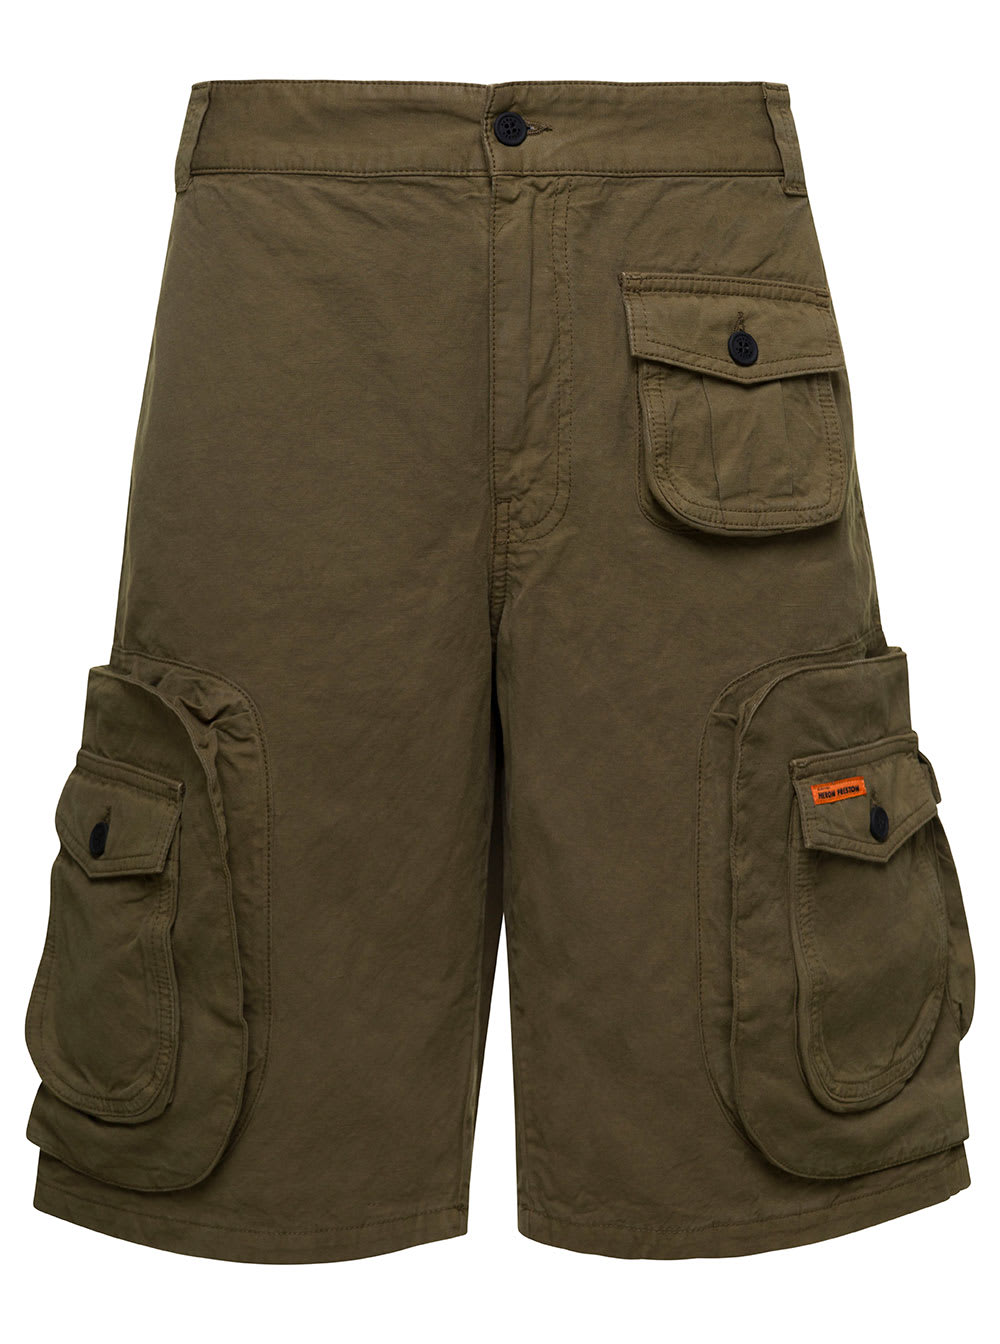 HERON PRESTON OLIVE GREEN CARGO SHORTS WITH MULTI-POCKETS IN COTTON BLEND MAN